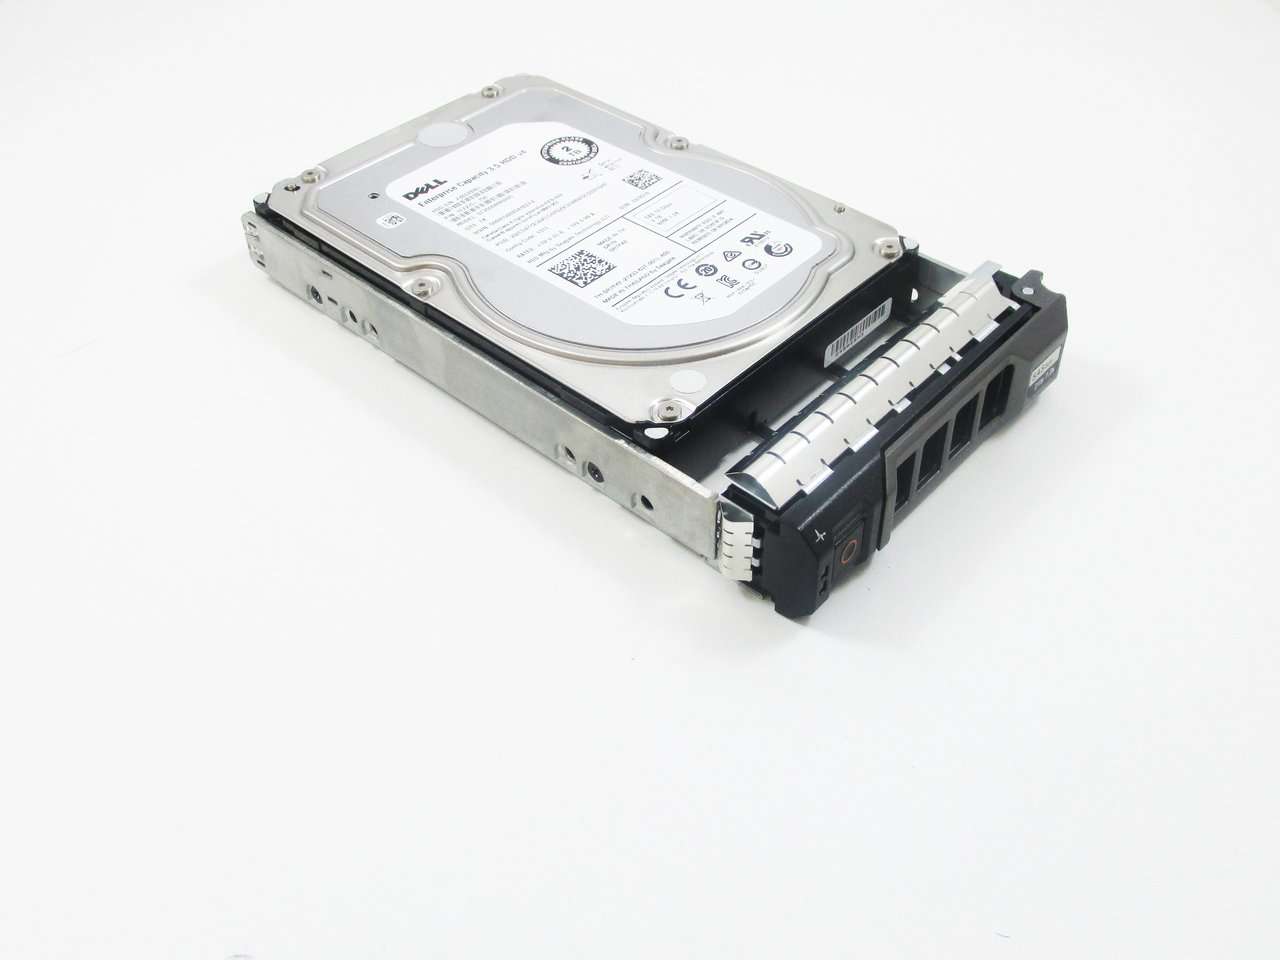 Dell G13 0R7FKF 2TB 7.2K RPM SAS 12Gb/s 512n 3.5" NearLine Manufacturer Recertified HDD